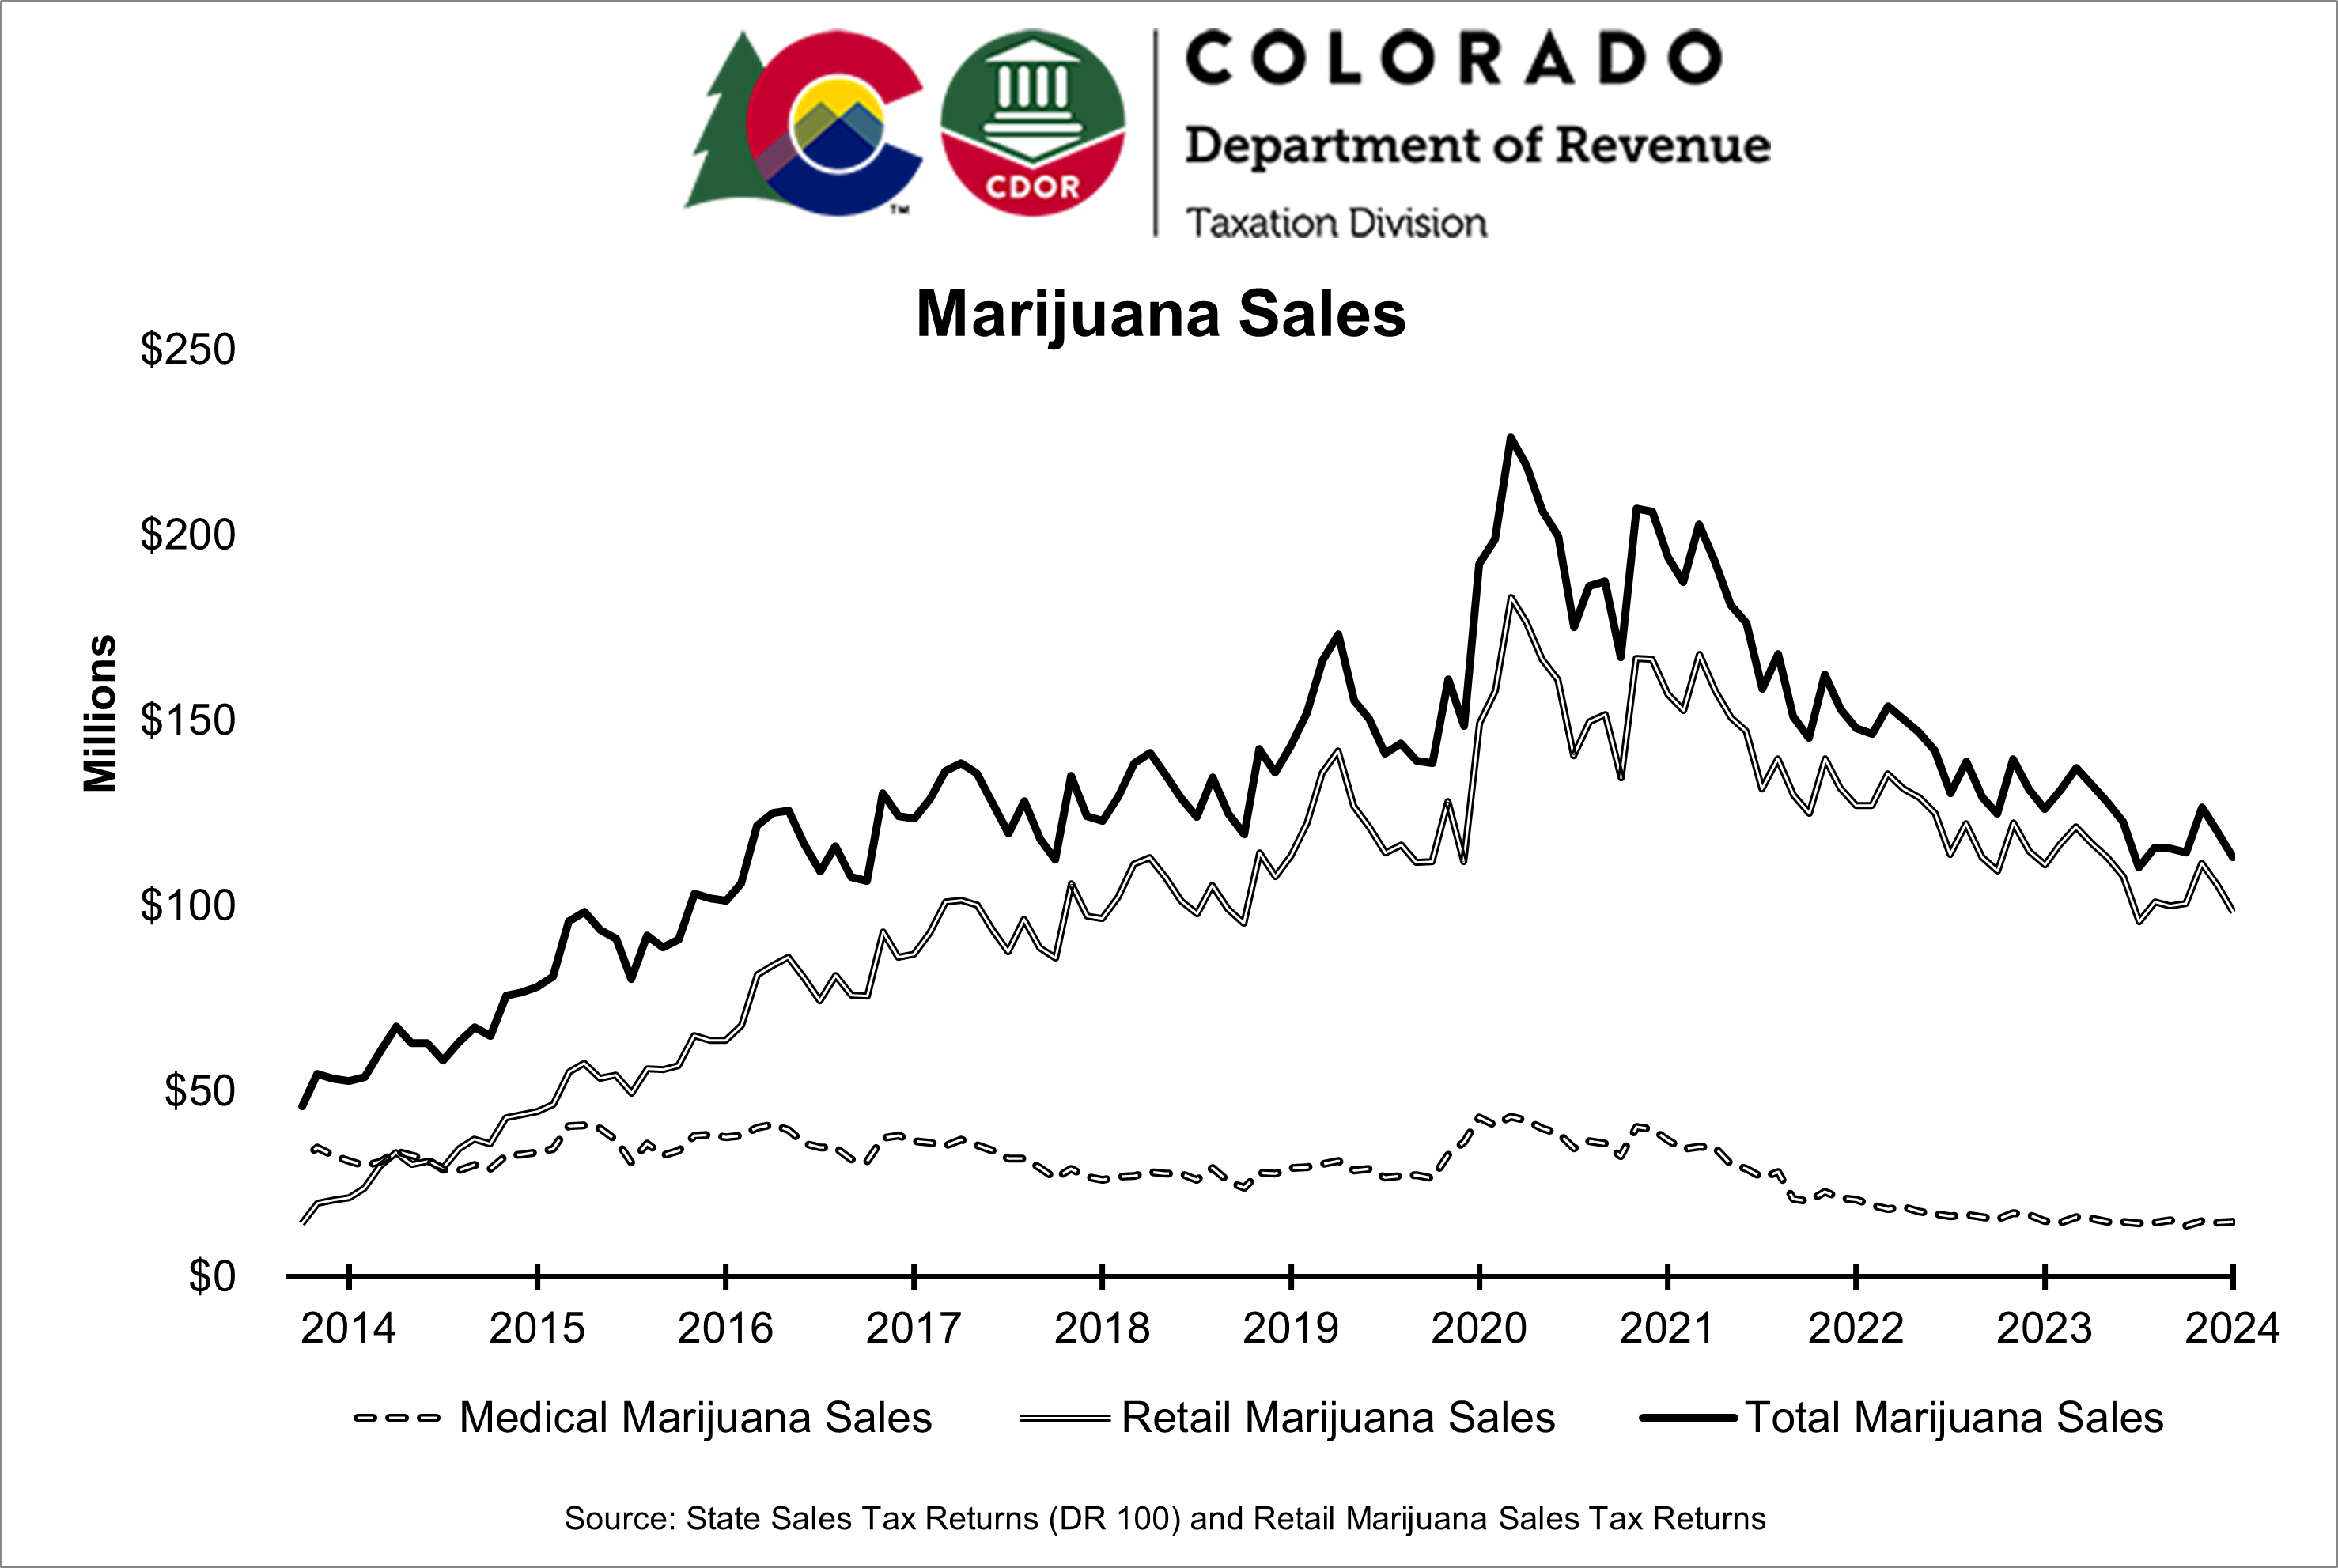 Graph of marijuana sales from 2014 to 2024 with sales peaking during 2020